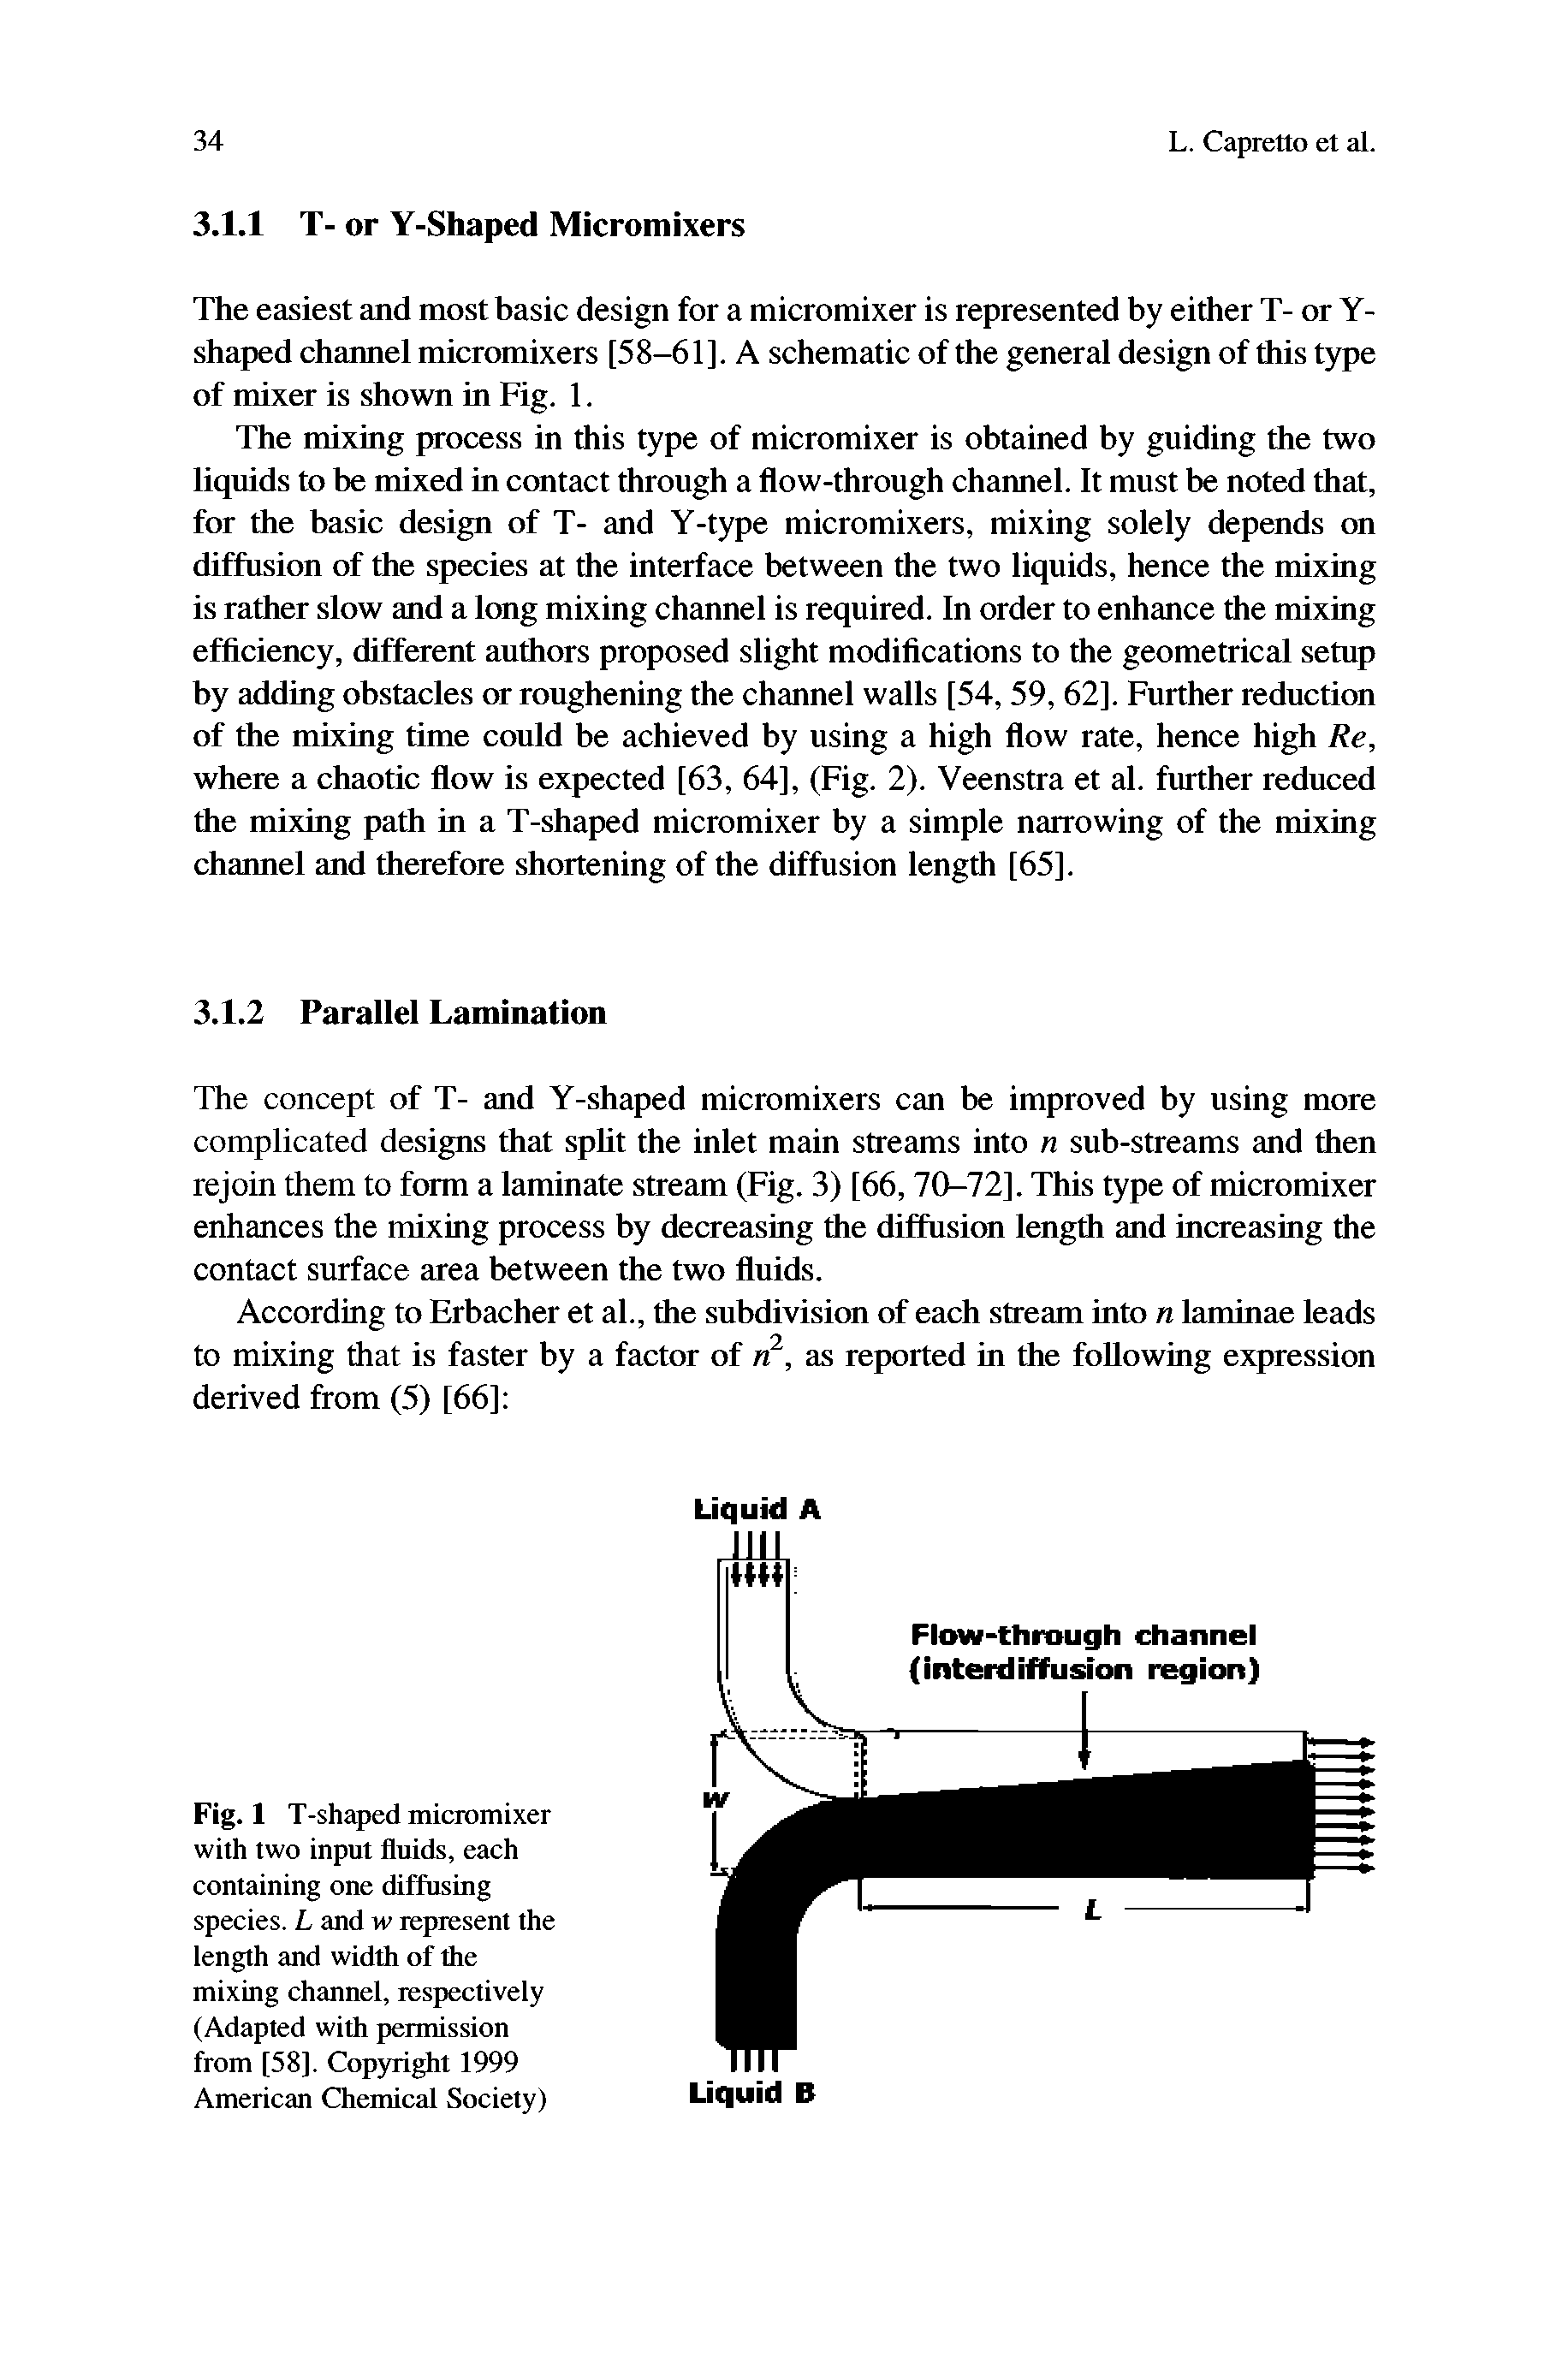 Fig. 1 T-shaped micromixer with two input fluids, each containing one diffusing species. L and w represent the length and width of the mixing channel, respectively (Adapted with permission from [58]. Copyright 1999 American Chemical Society)...